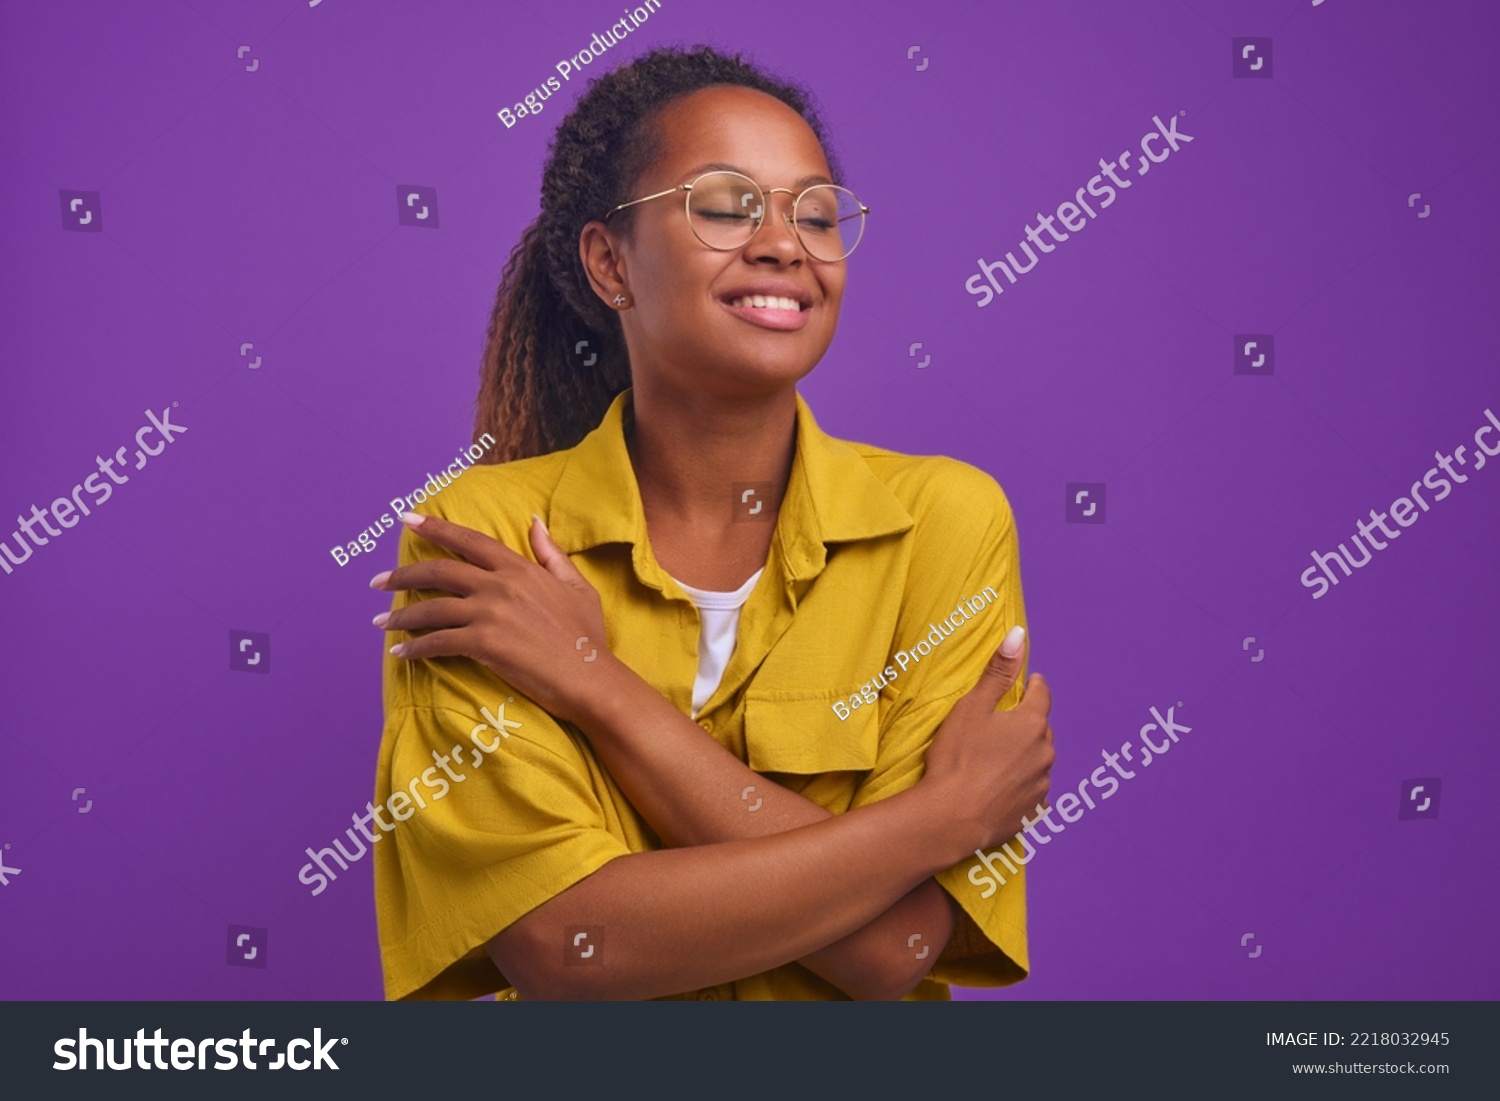 Young happy beautiful African American woman millennial with curly hair hugs herself to cheer up and get rid of loneliness dressed in casual yellow shirt, stands on isolated purple background. #2218032945